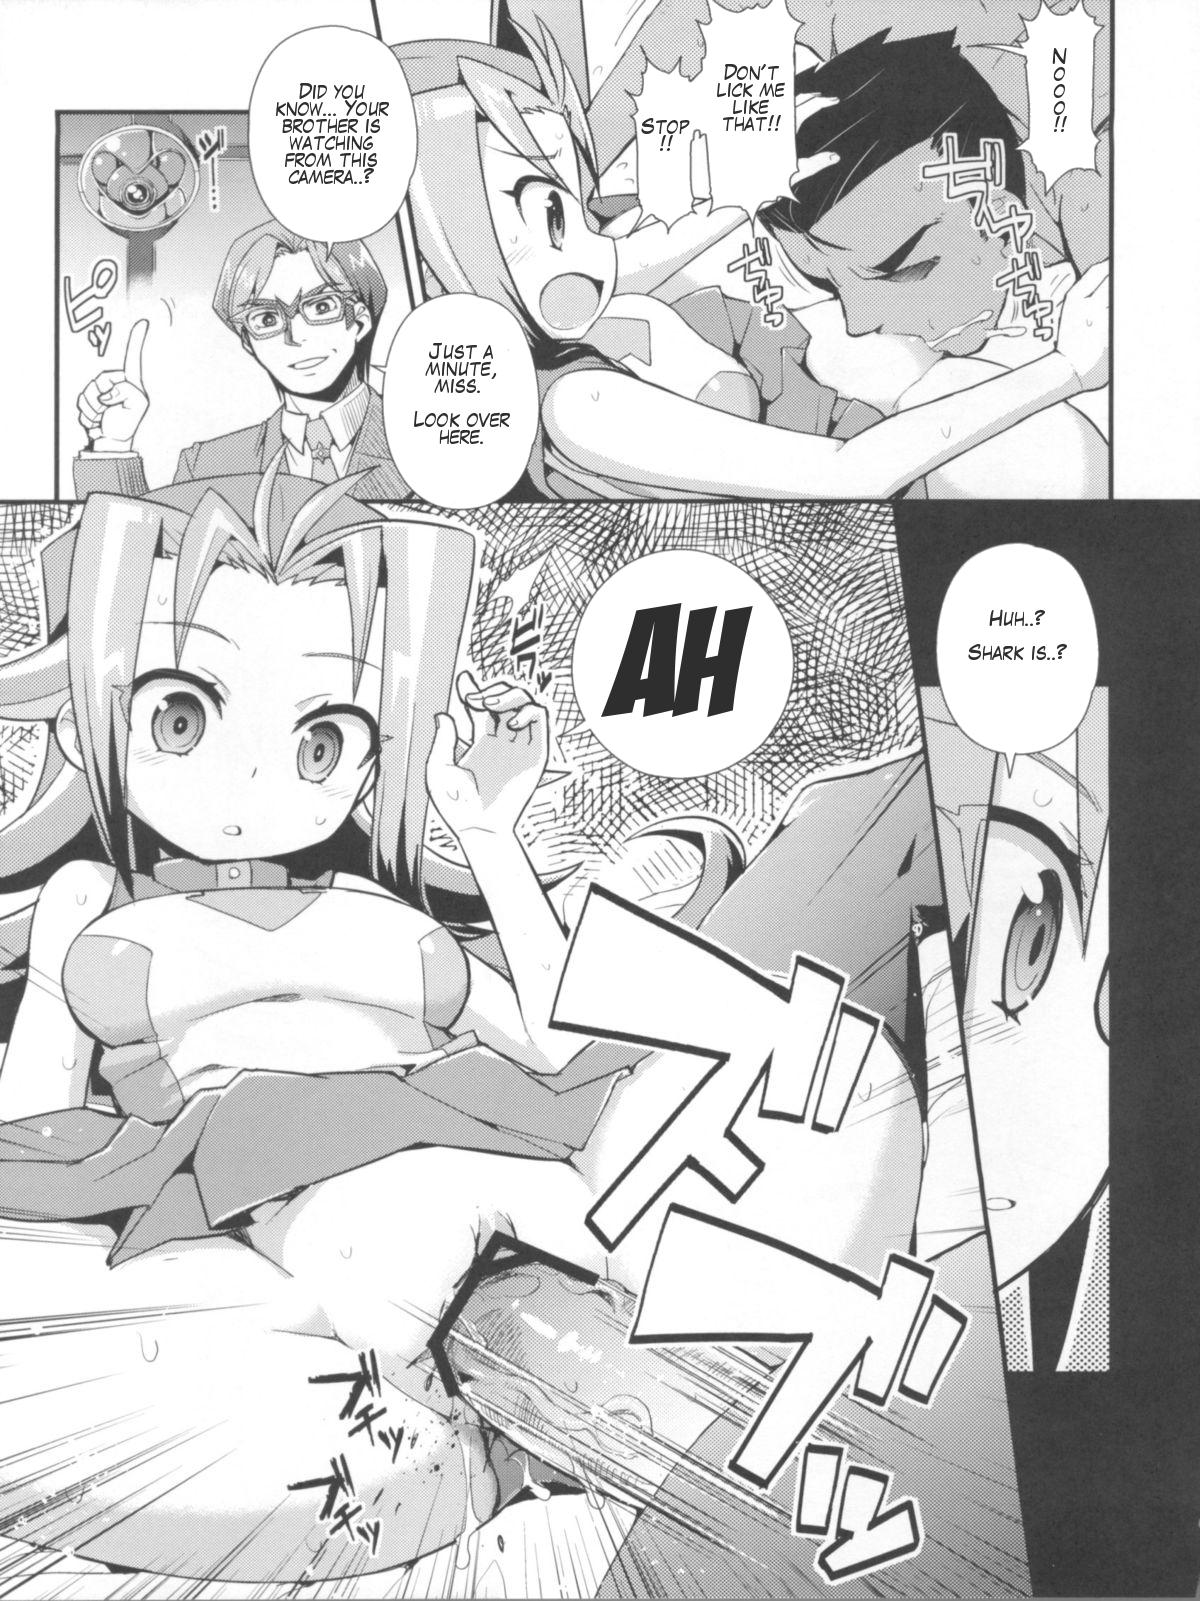 Amature Porn Carnival! - Yu-gi-oh zexal Titties - Page 9